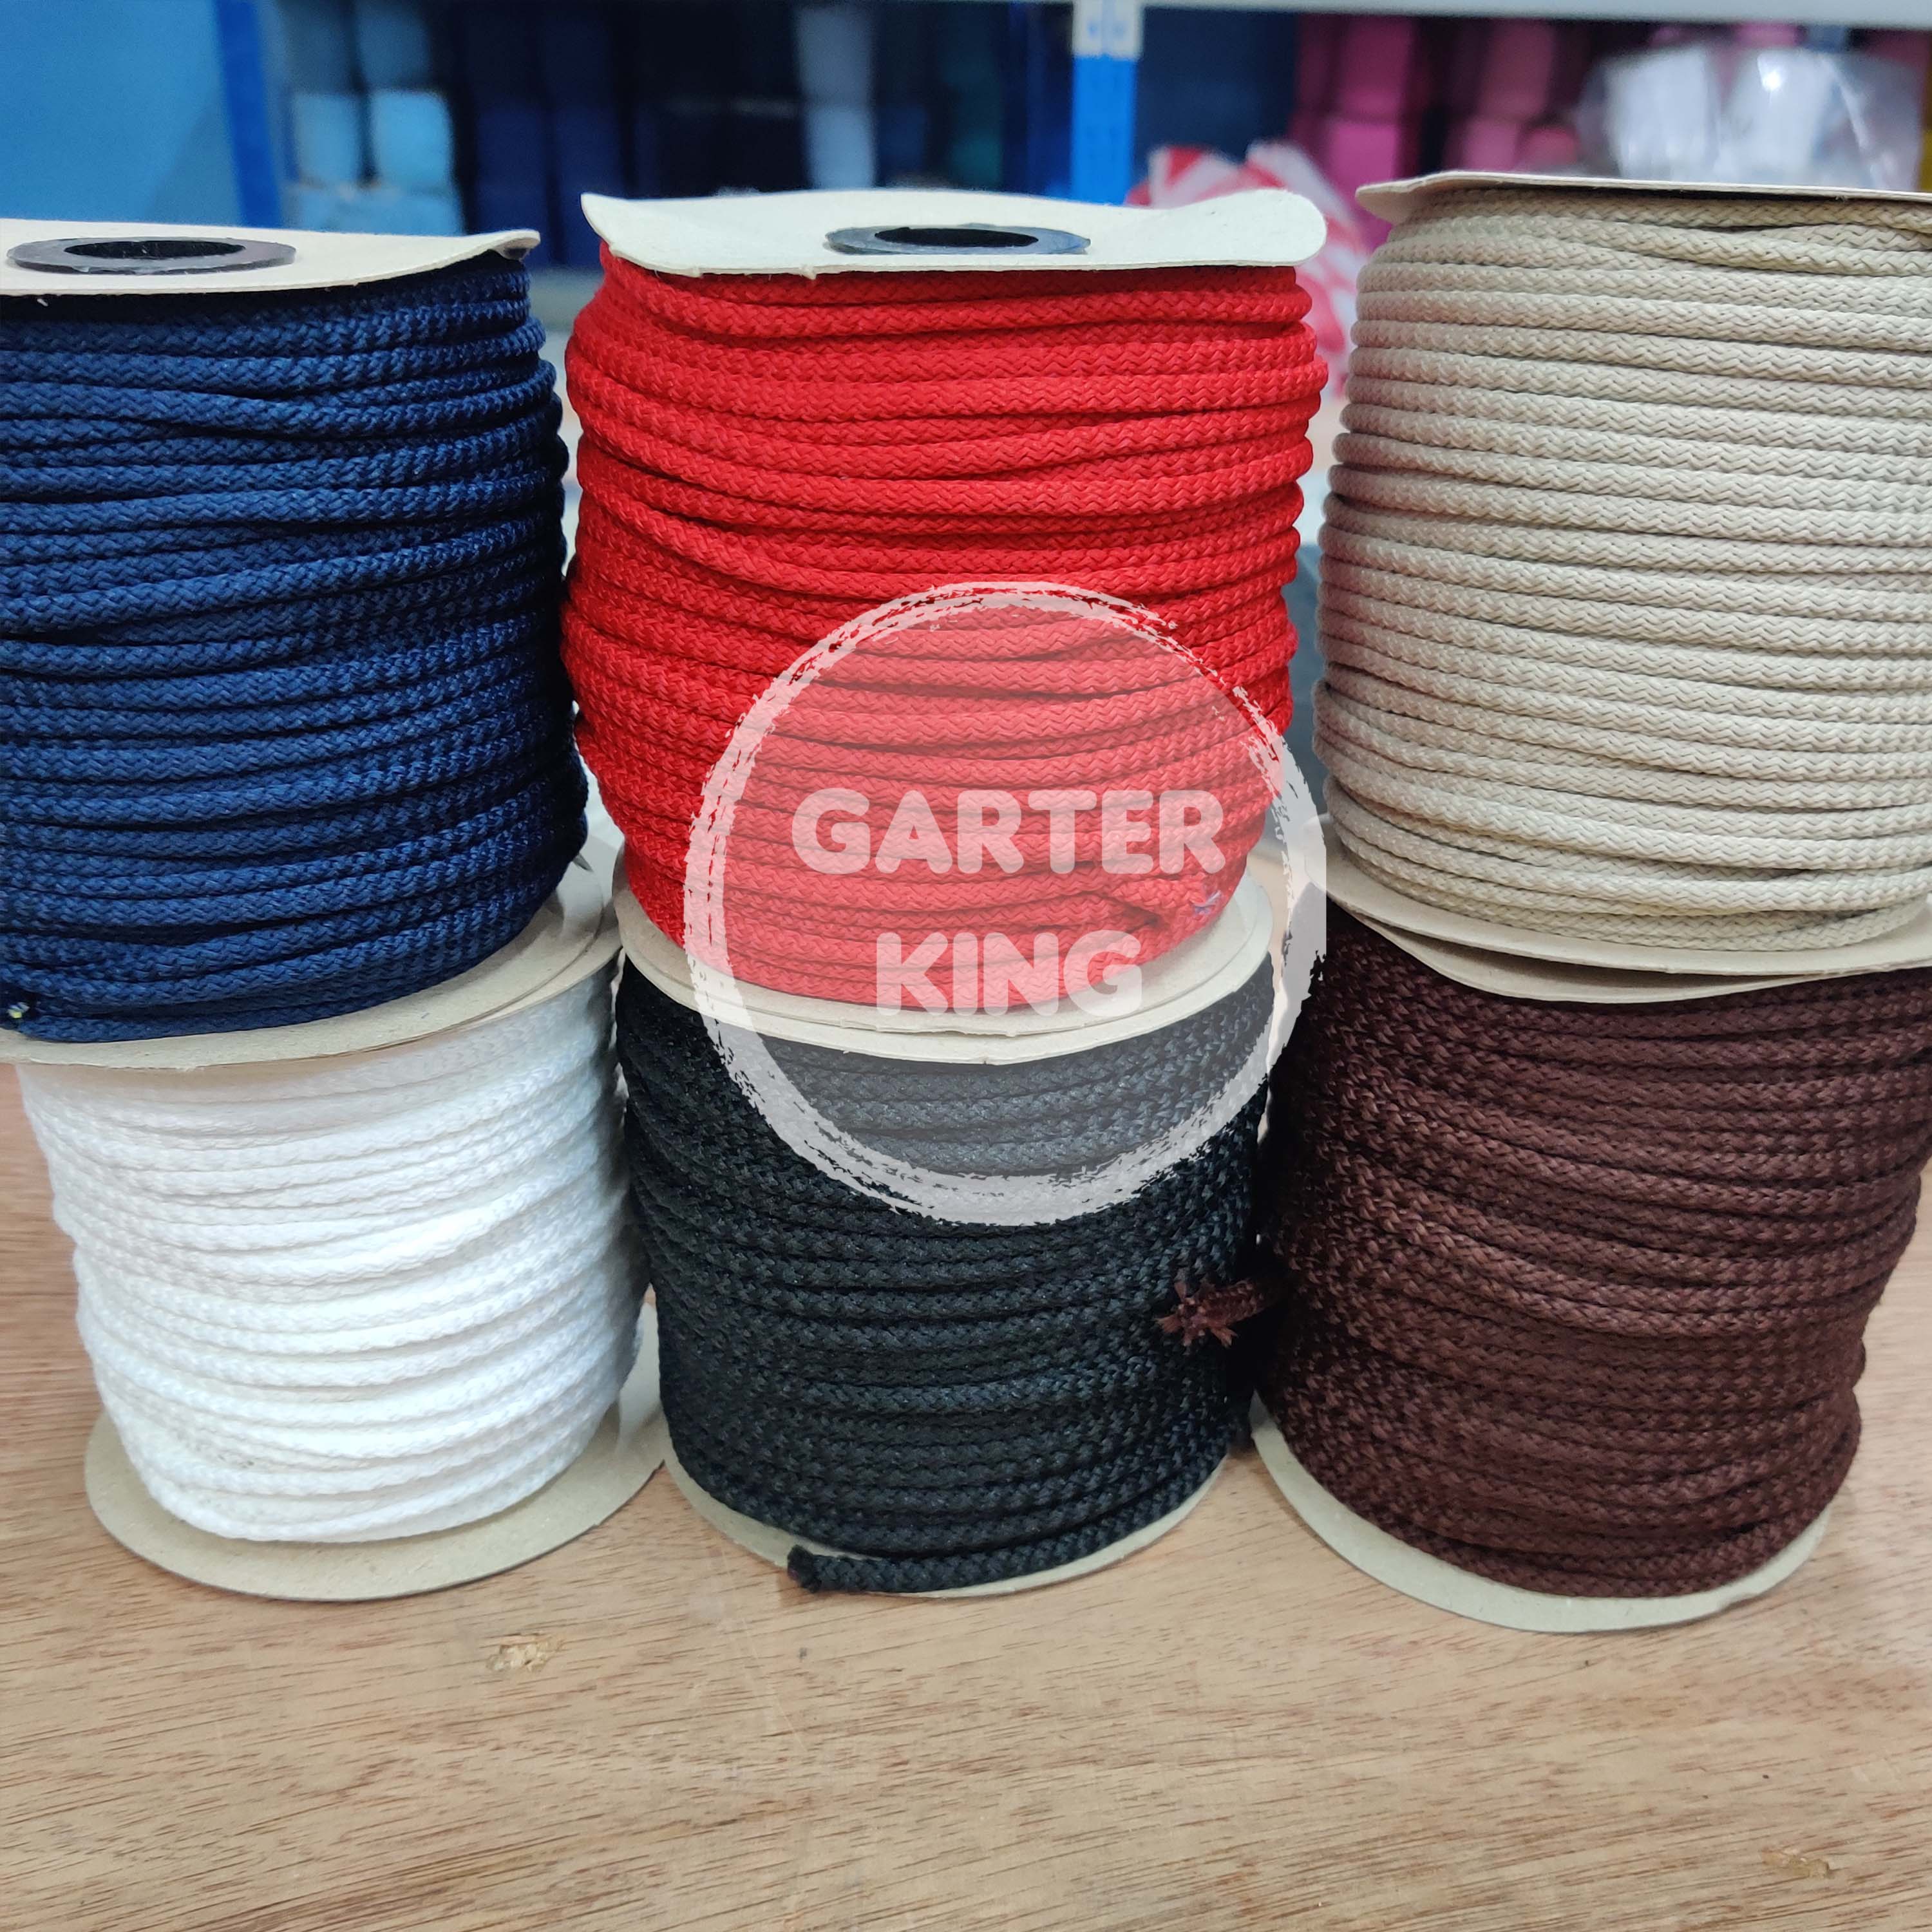 COTTON / POLYESTER CORD (60 YARDS PER ROLL) NOT elastic / garter